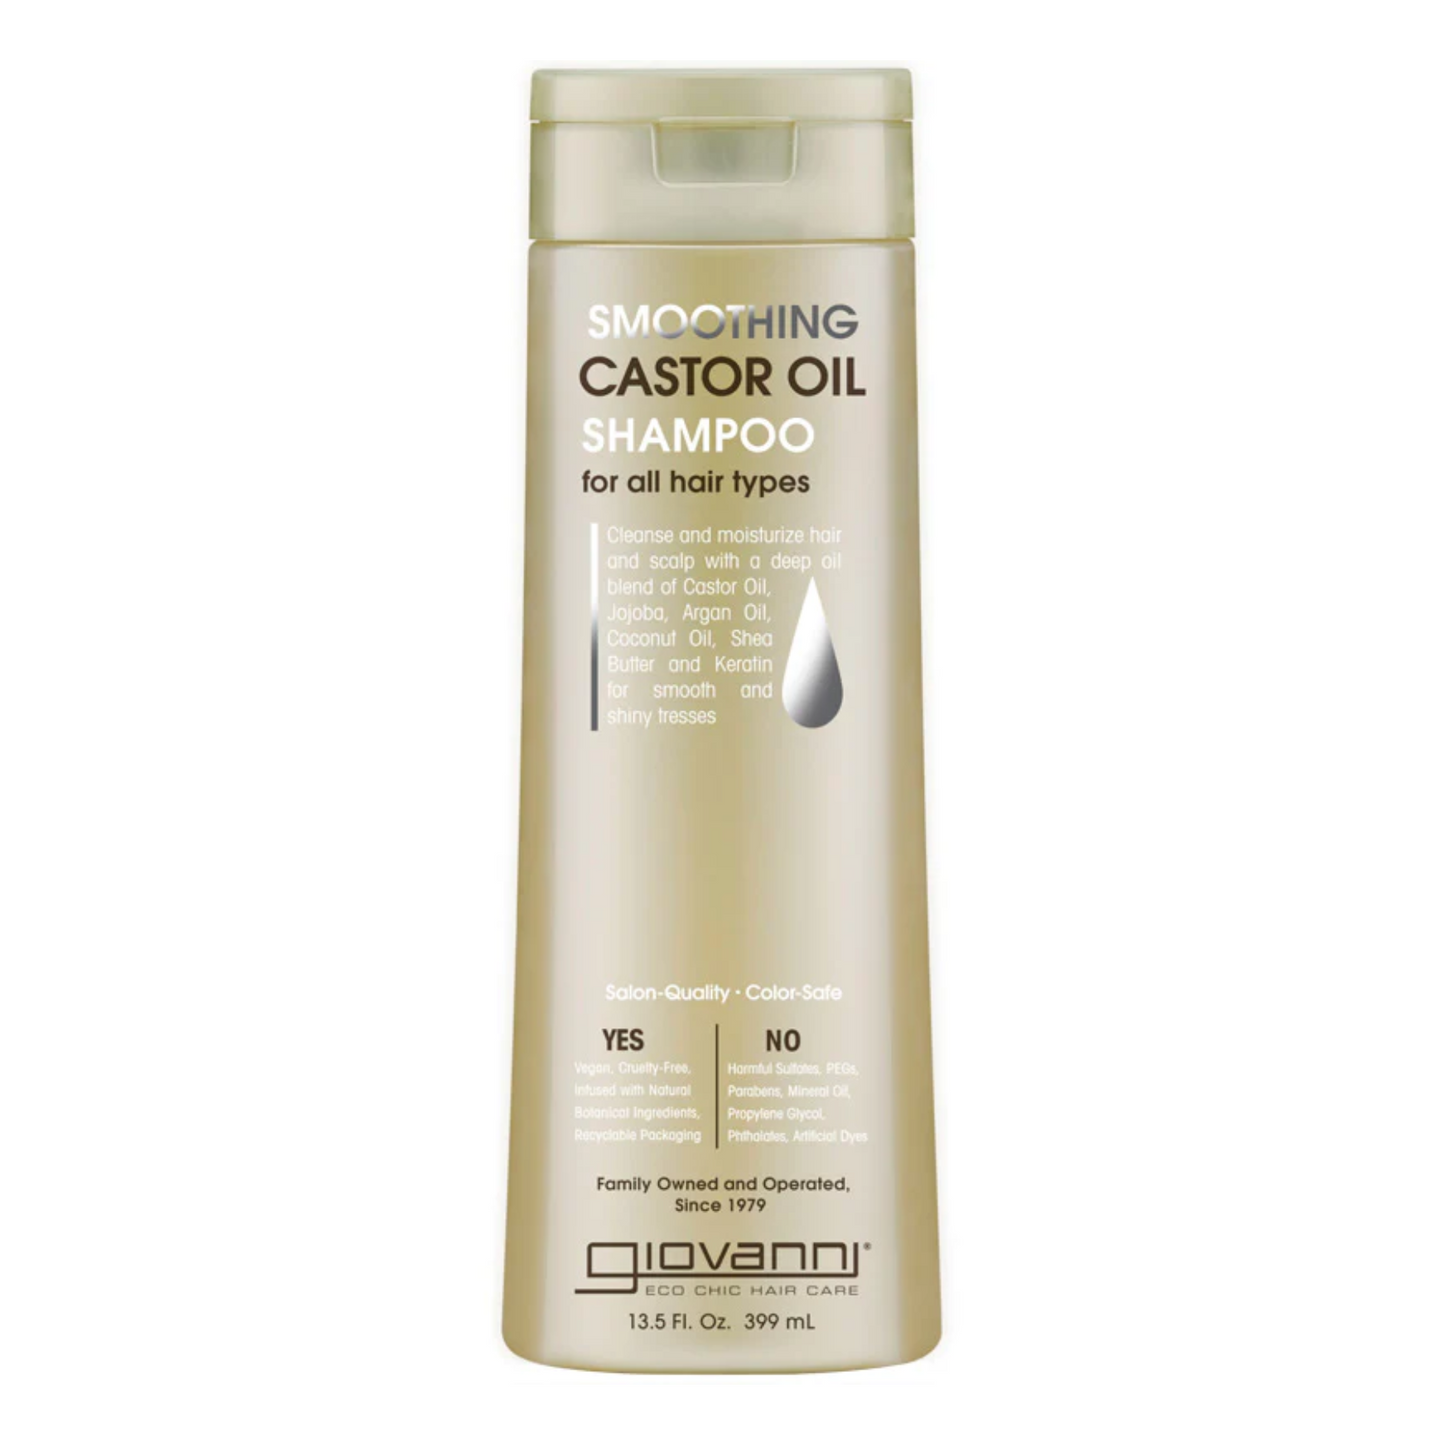 Giovanni Smoothing Castor Oil Shampoo 250ml, For All Hair Types